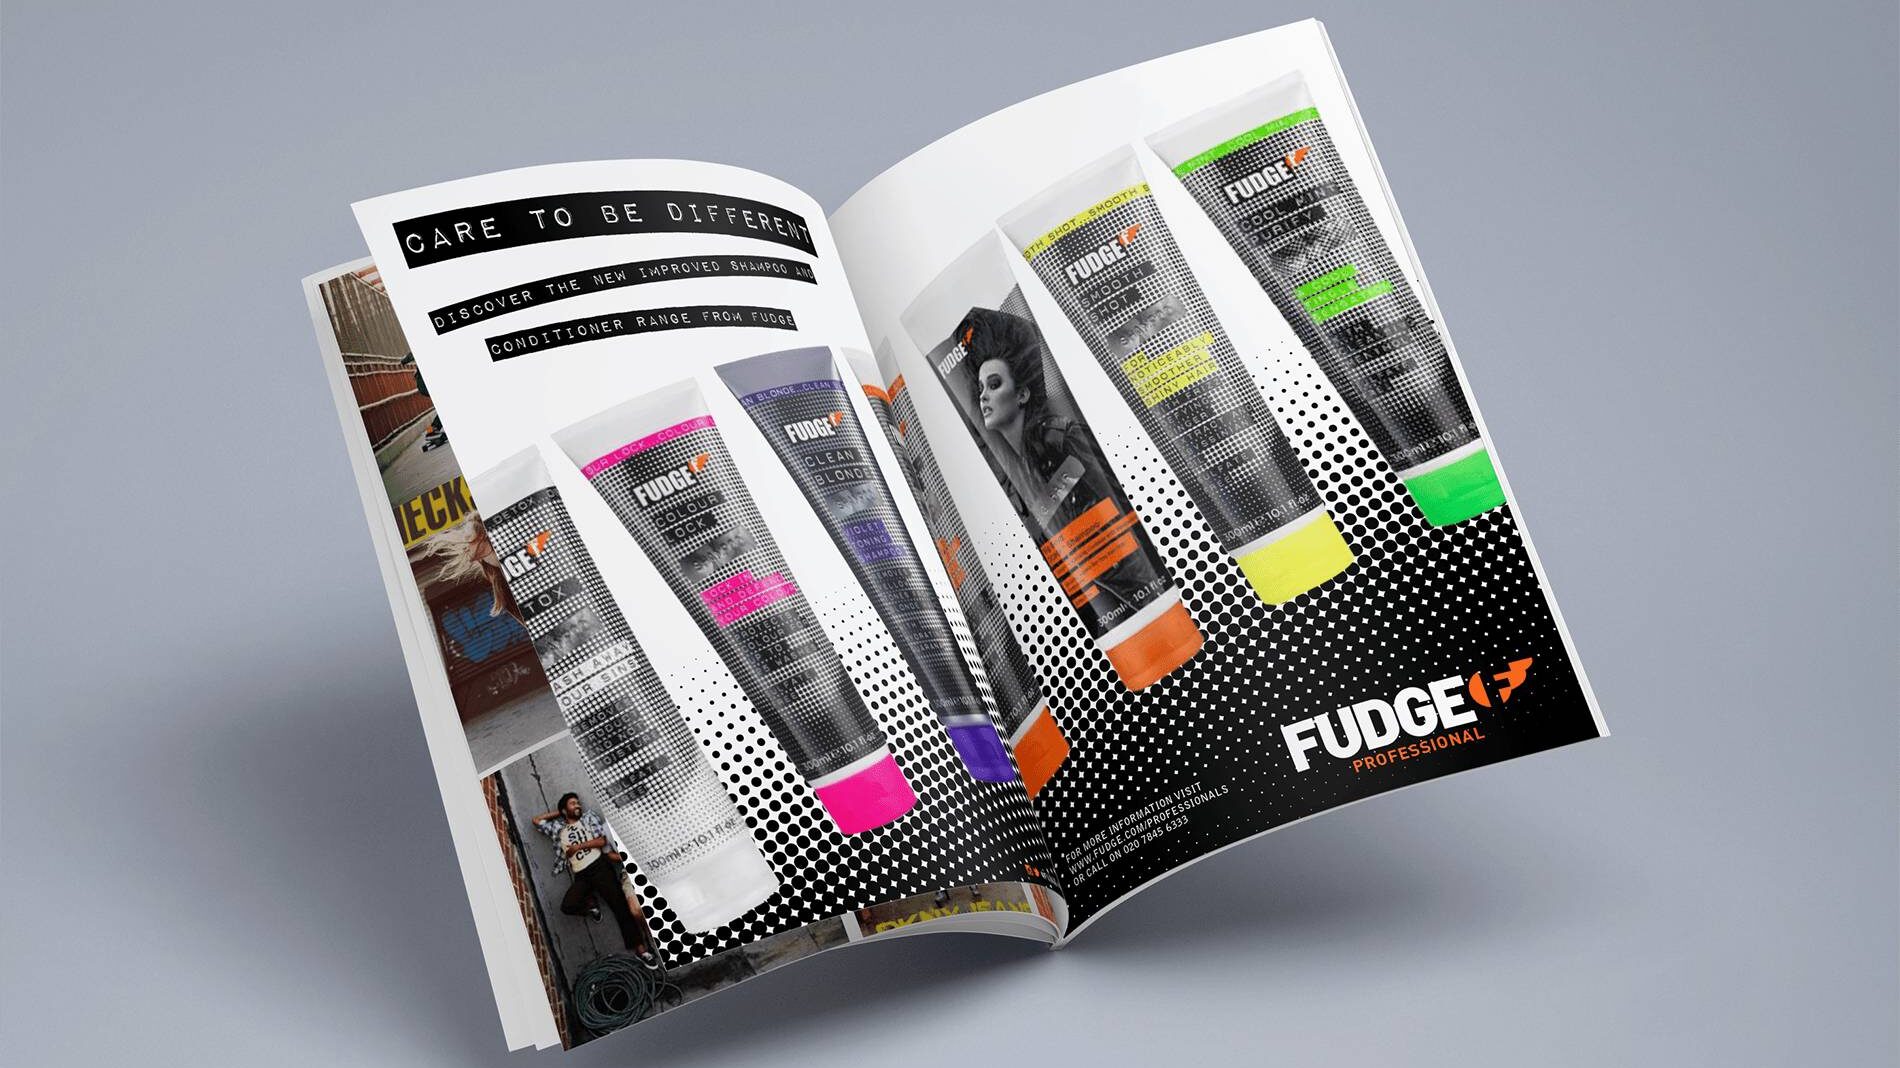 Magazine open spread with double page advert for Fudge Professional range